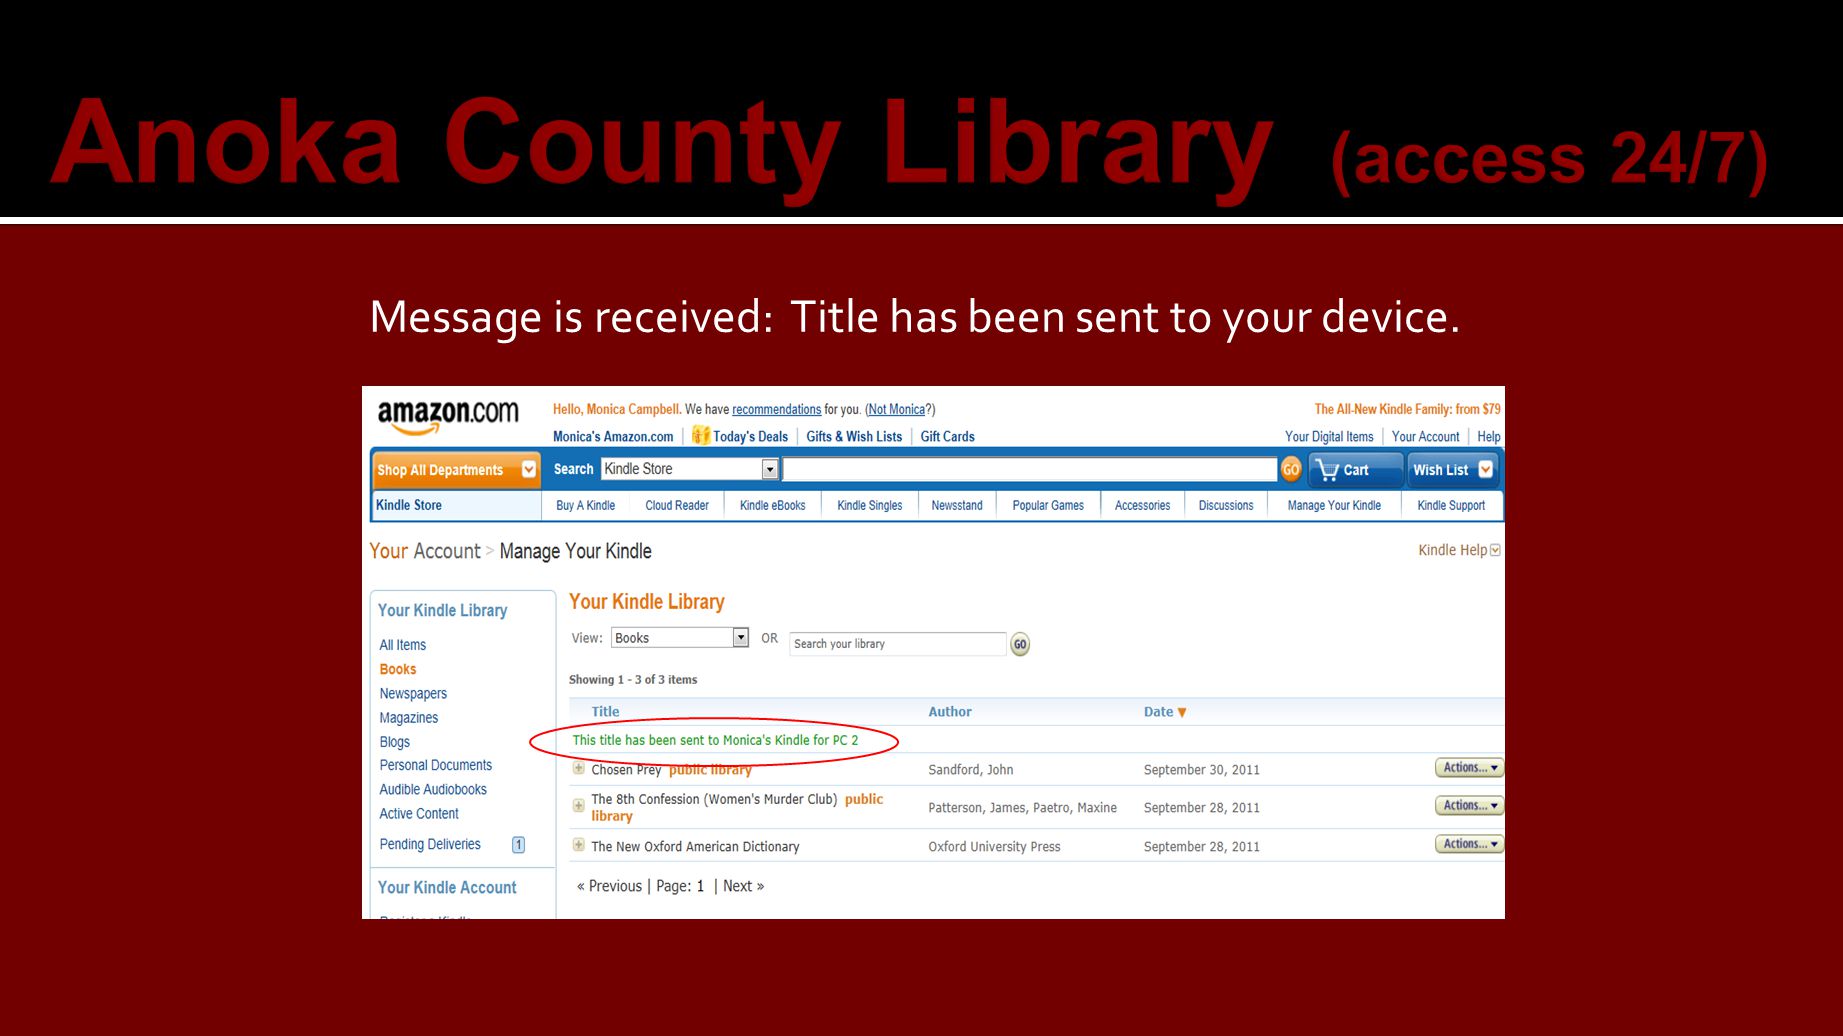 Anoka County Library (access 24/7) Message is received: Title has been sent to your device.